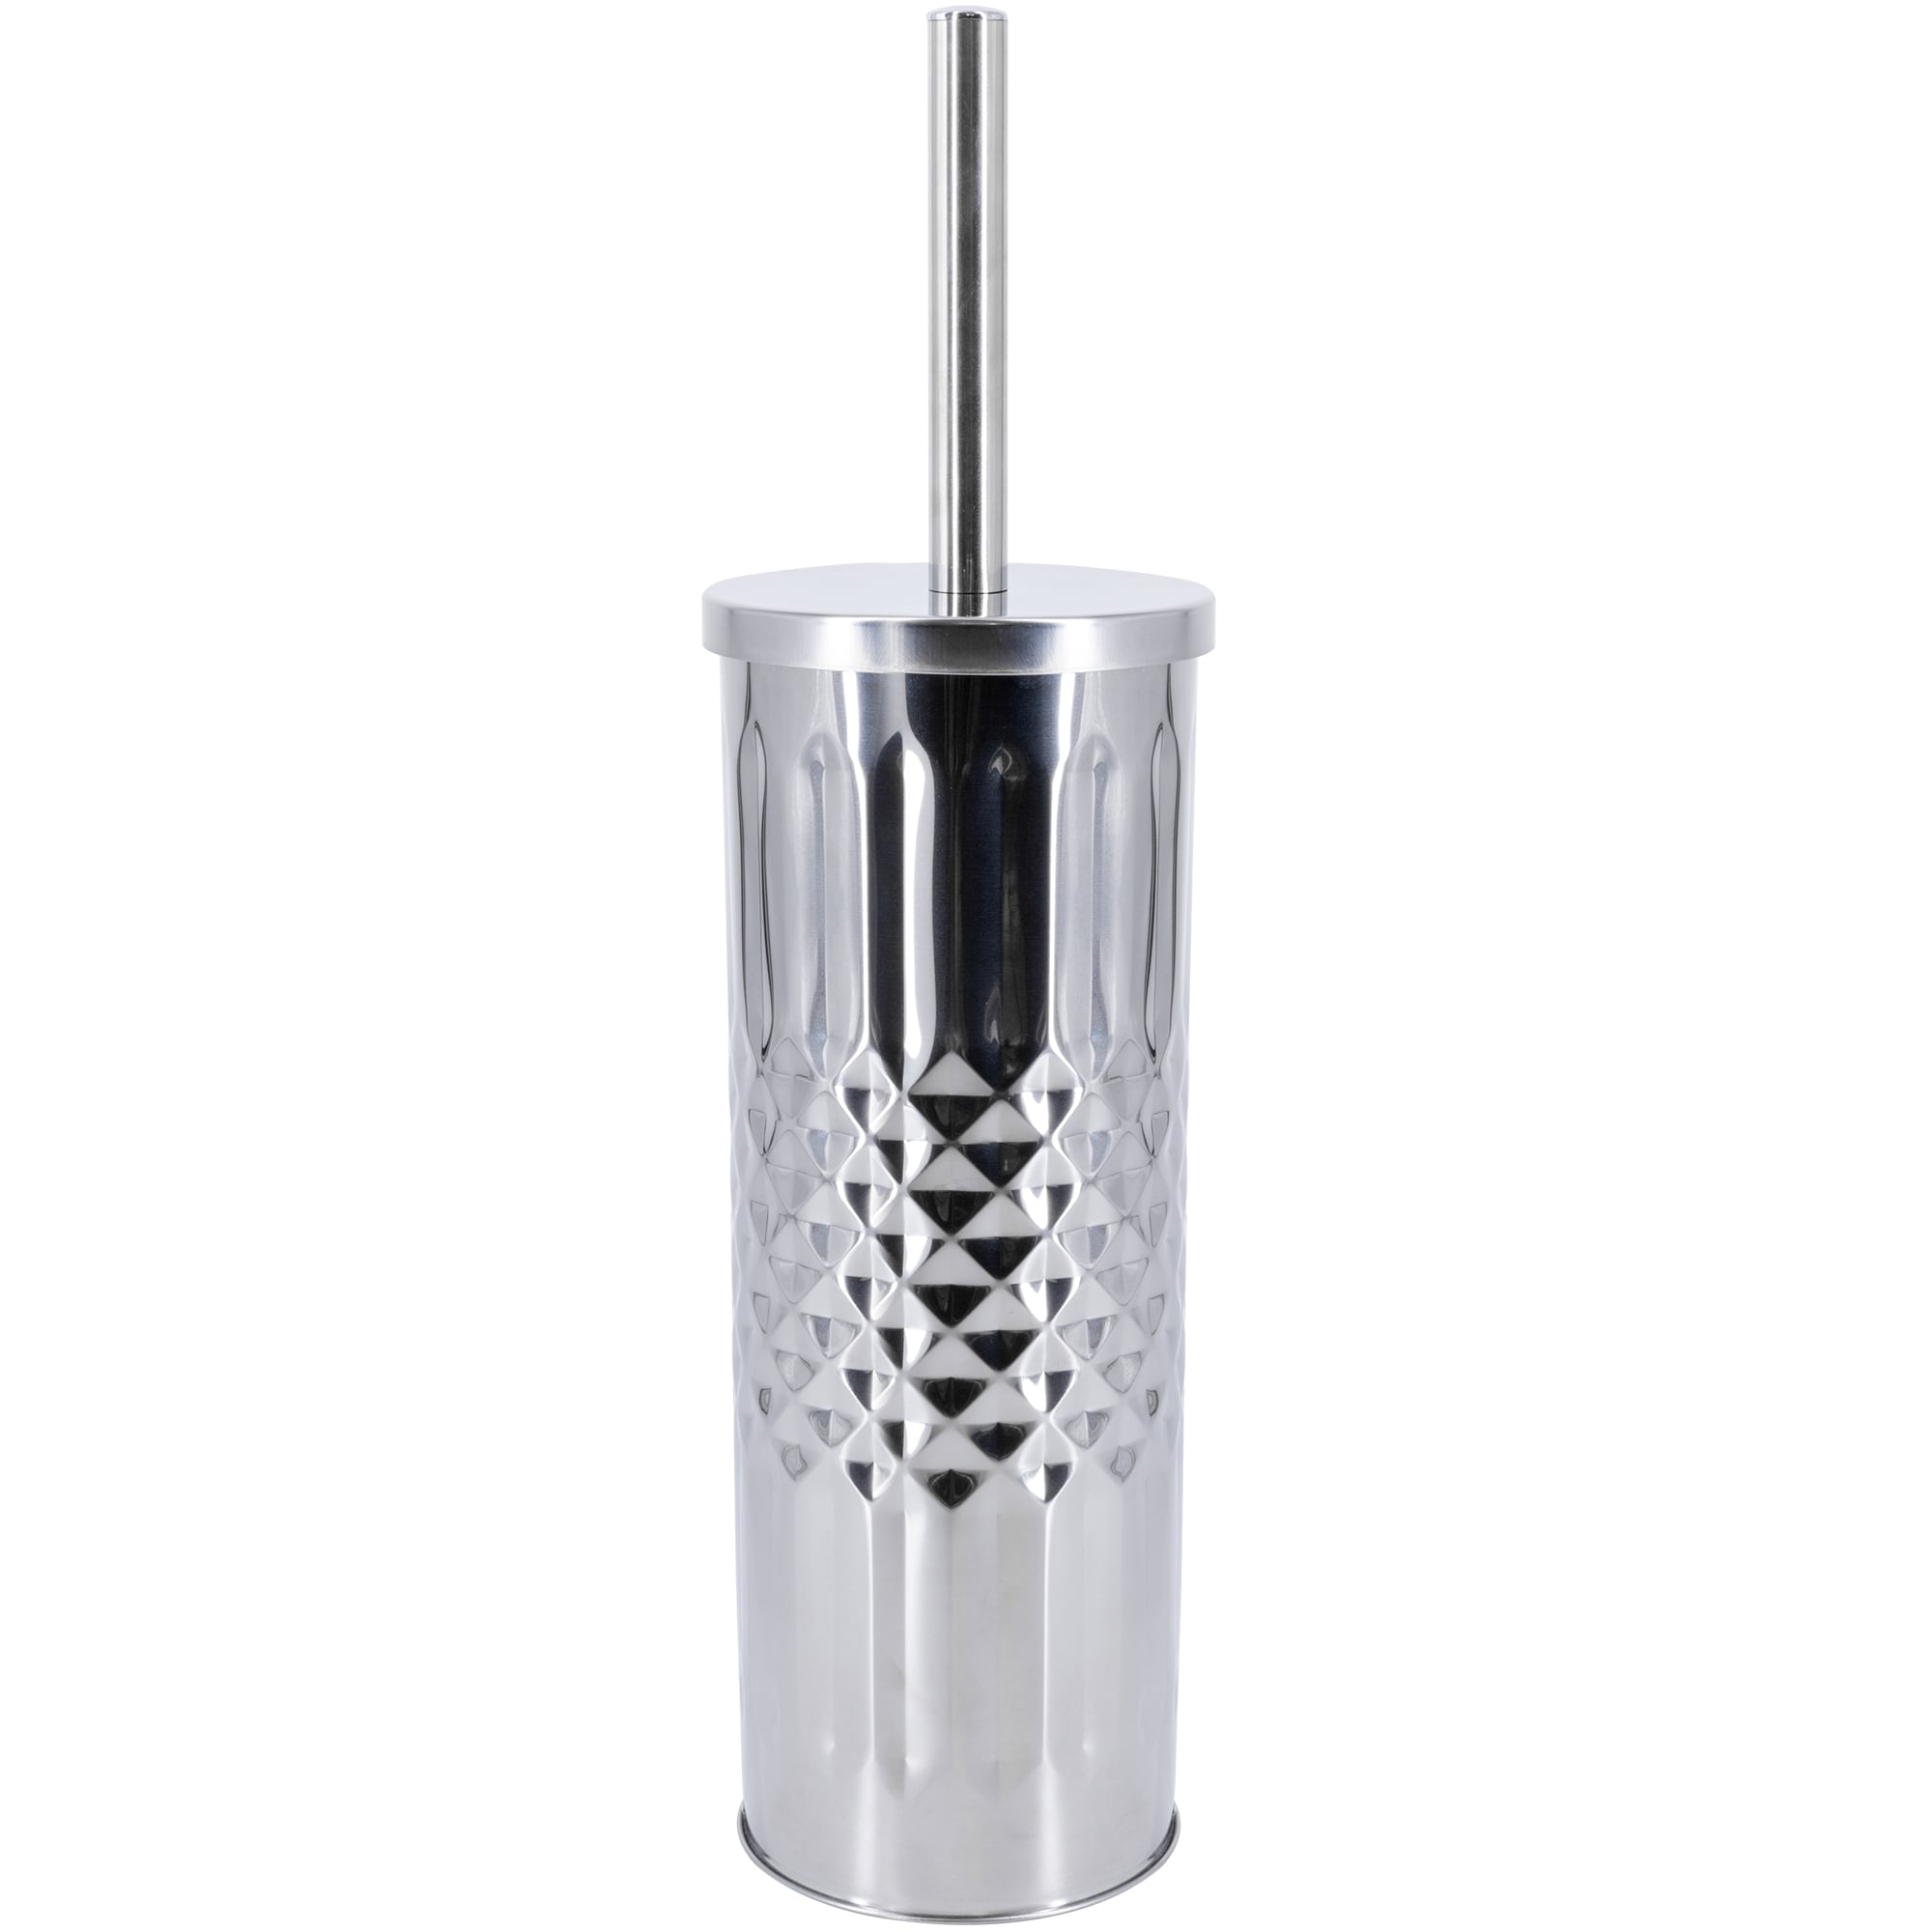 Toilet Brush and Holder, Compact Size Toilet Bowl Brush with Stainless  Steel Handle, Small Size Plastic Holder Easy to Hide, Space Saving for  Storage